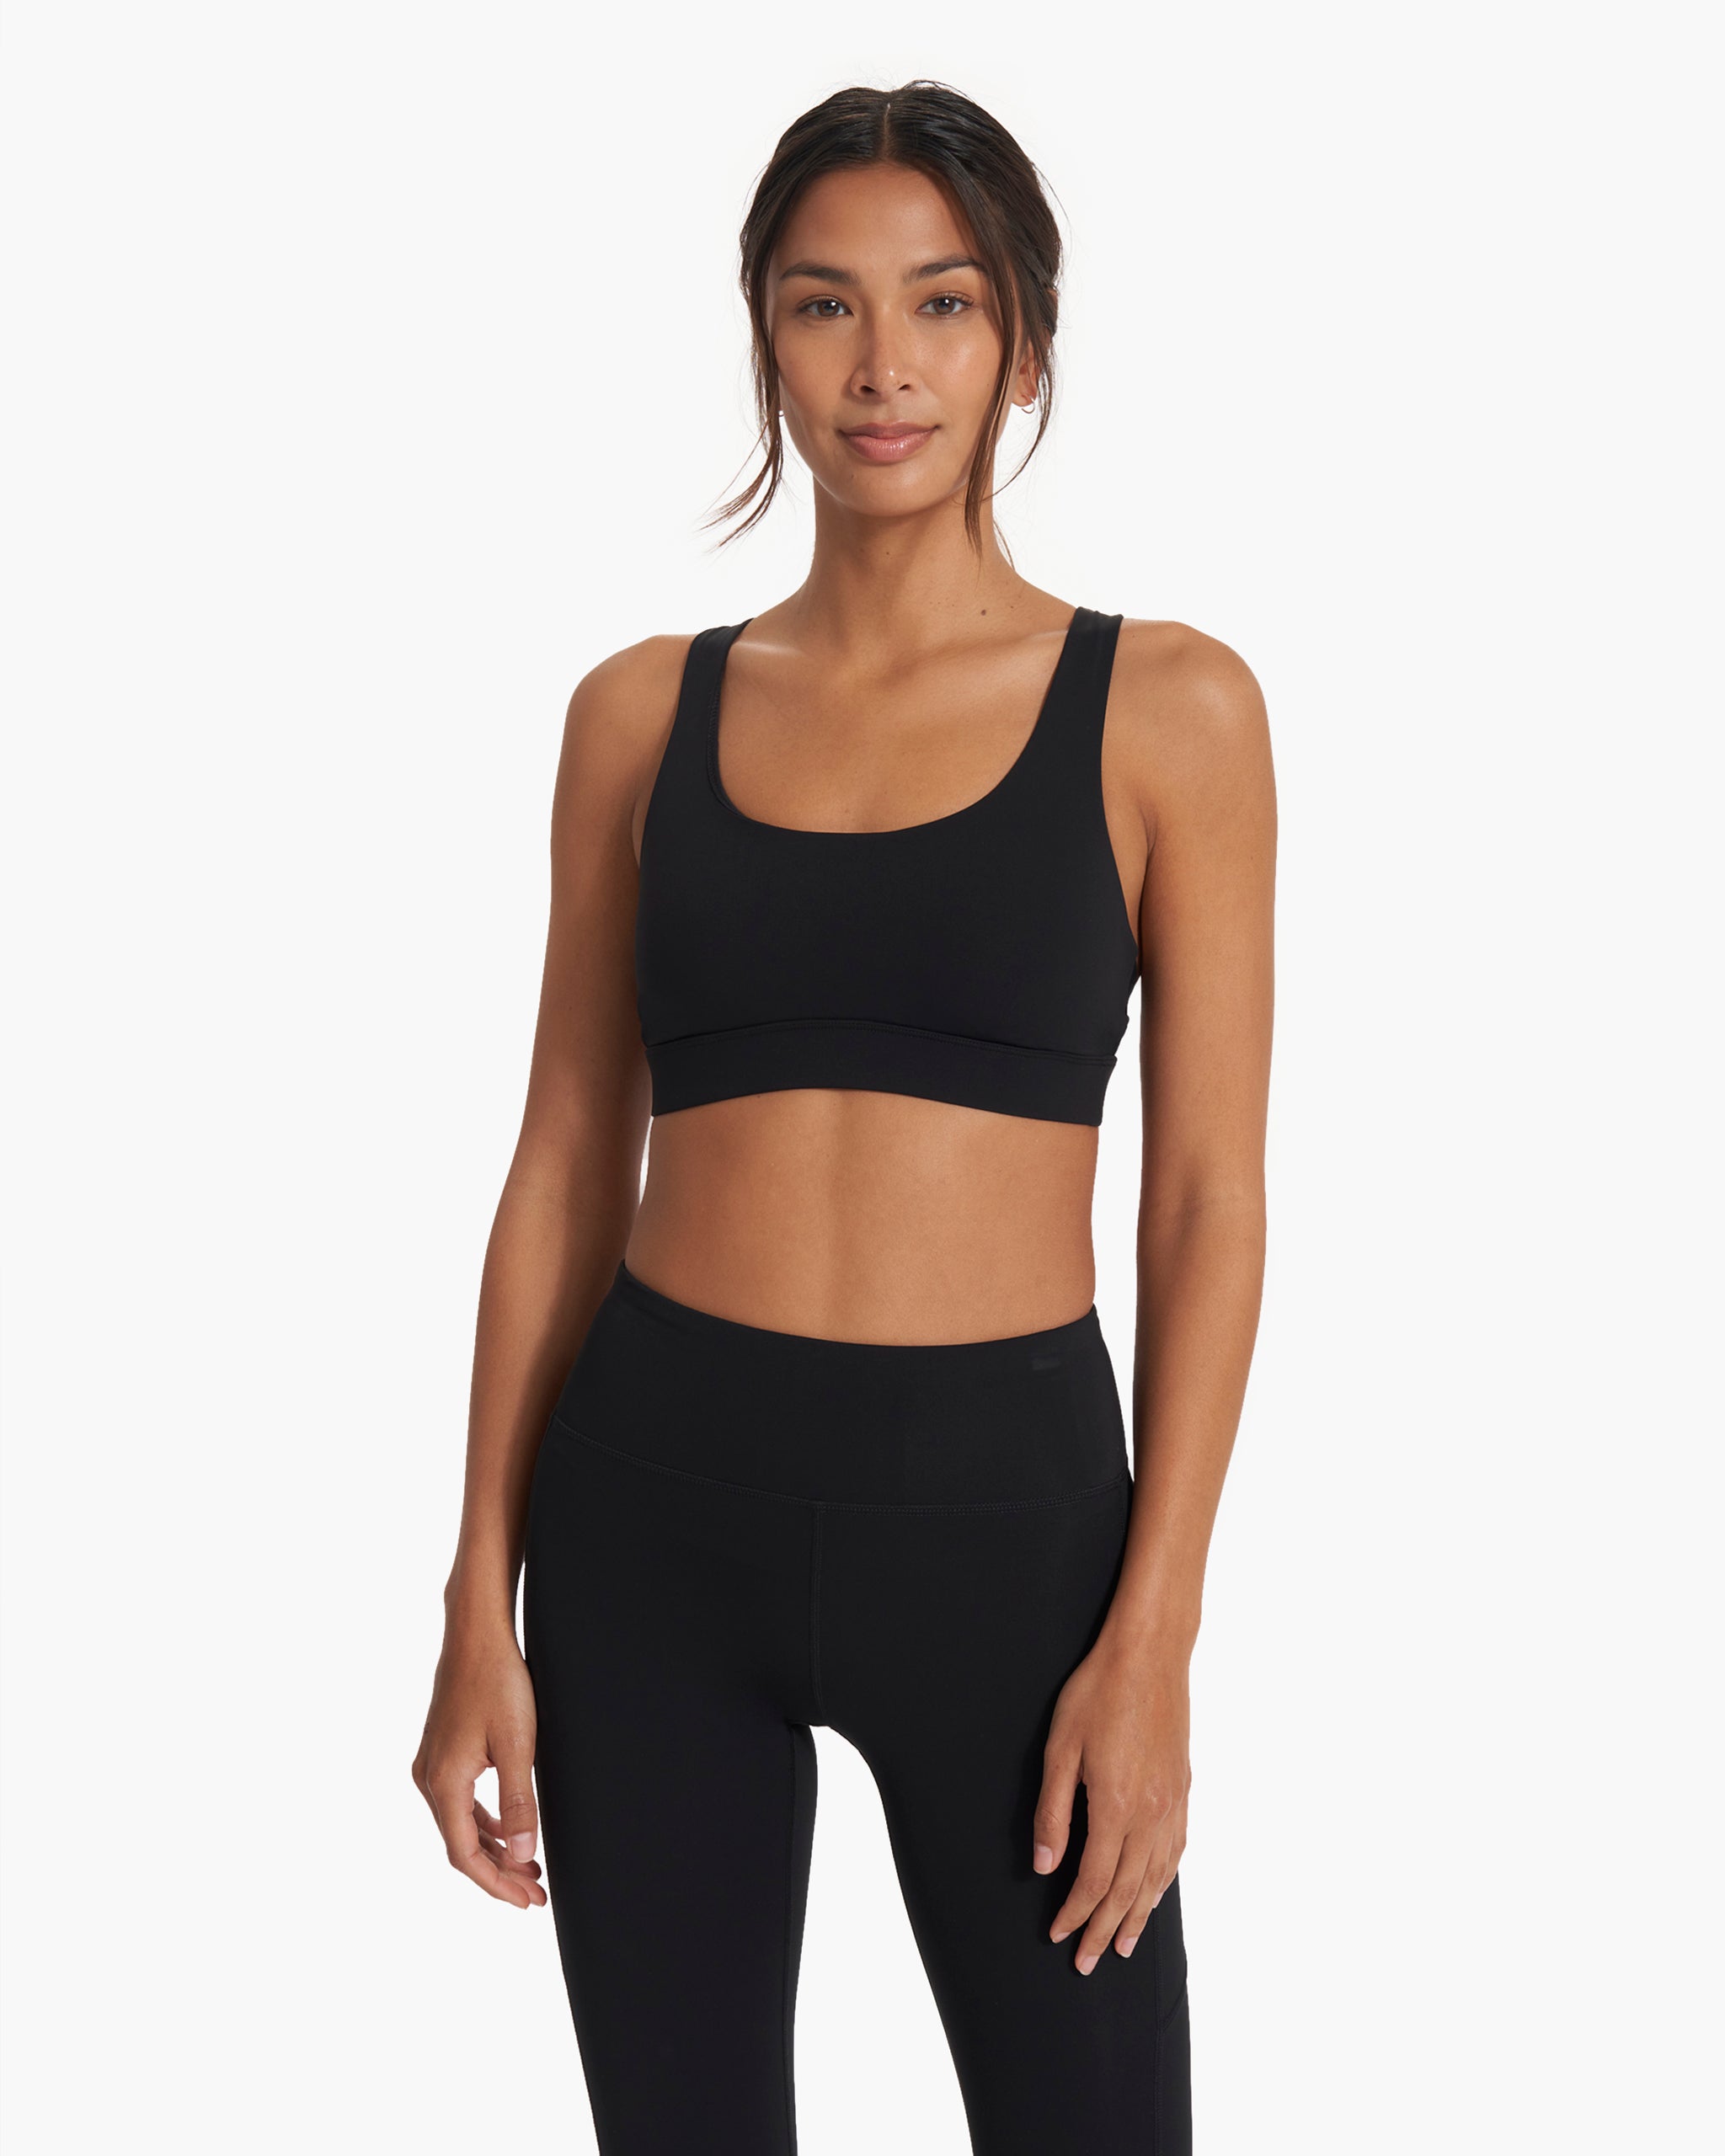 ENELL SPORT Bra, Size: 2 Black – Capital Books and Wellness